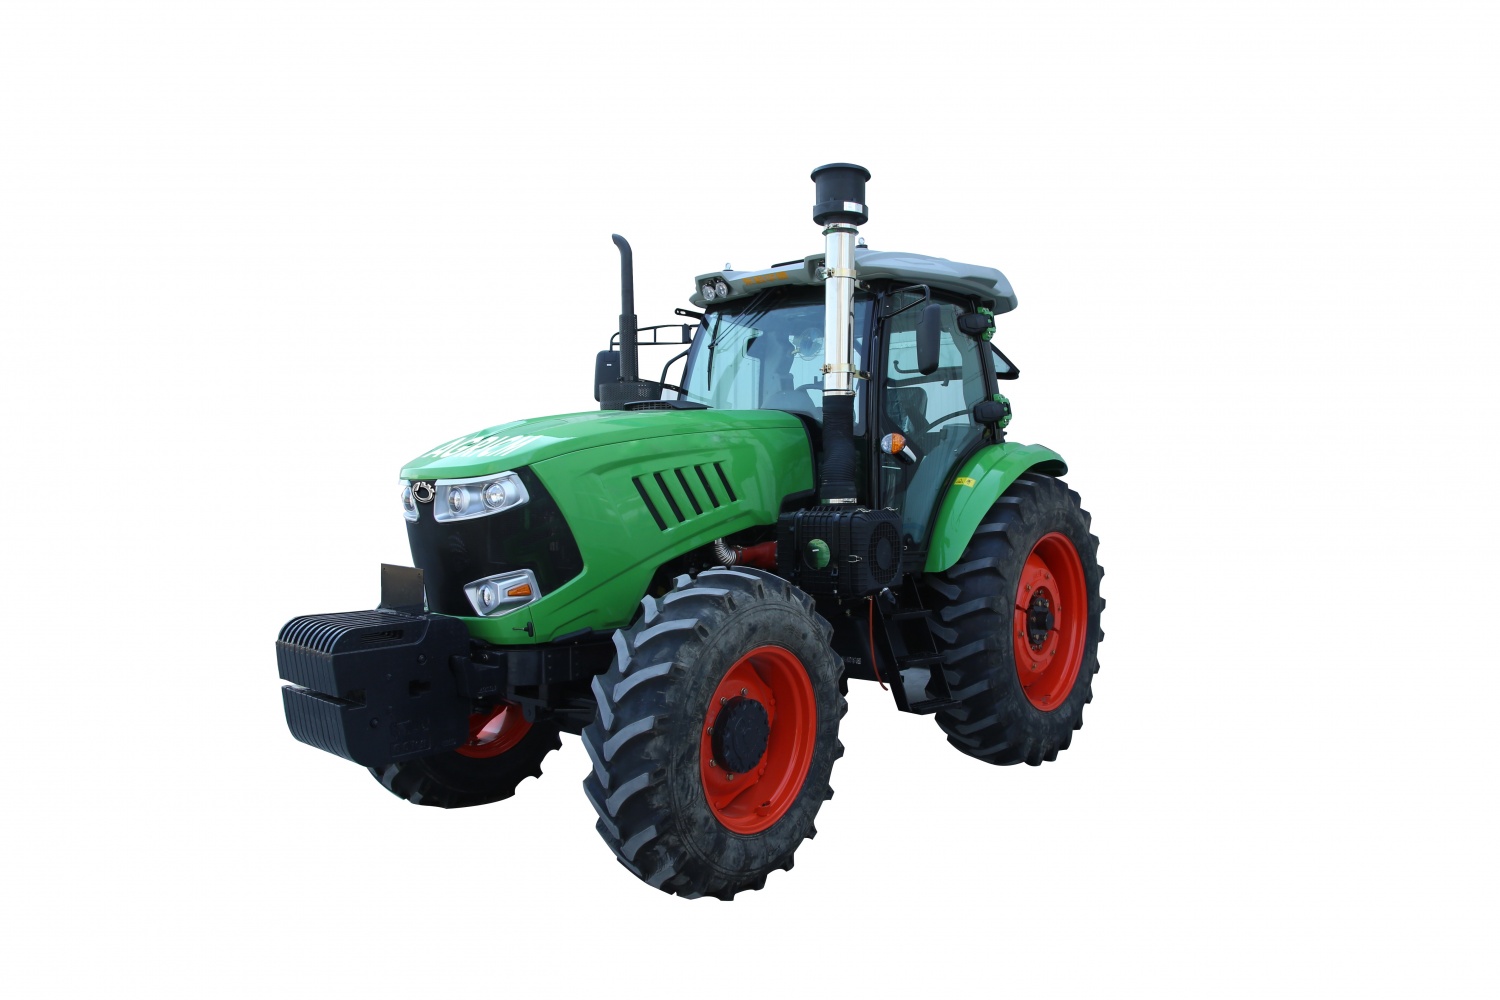 100HP Tractor